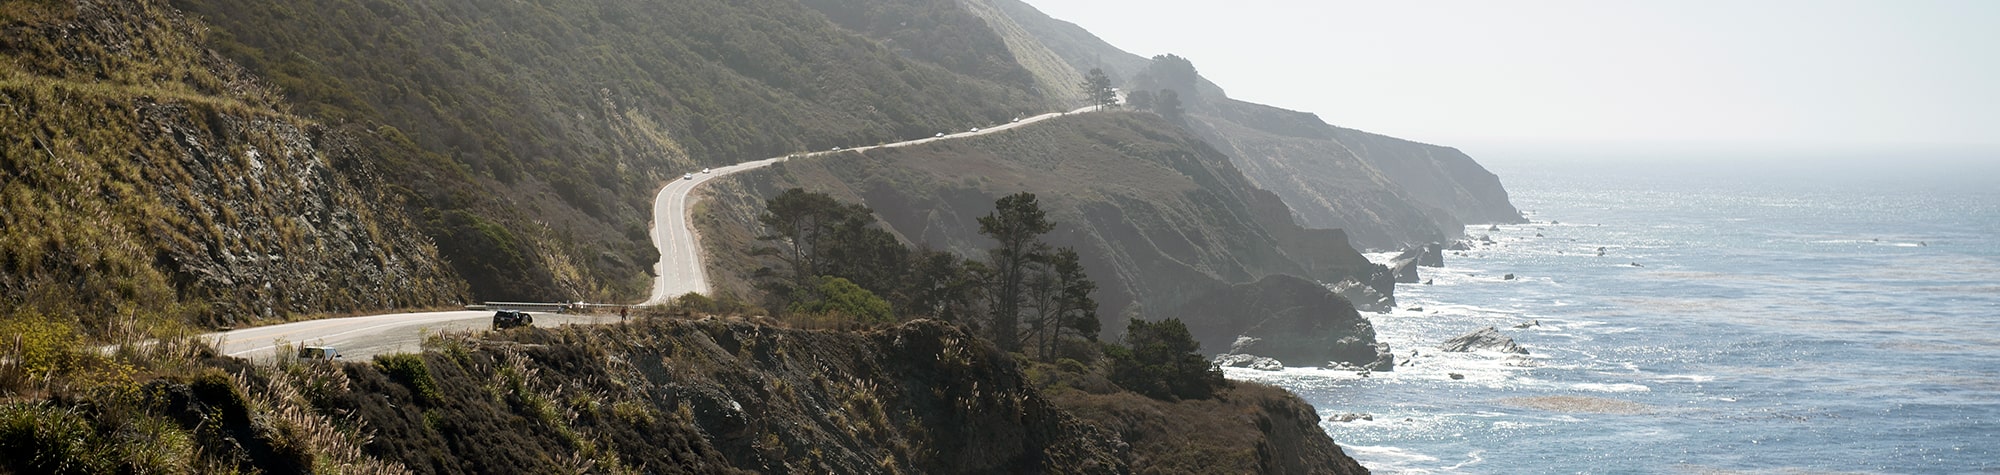 Highway on the coast of the water in the mountains